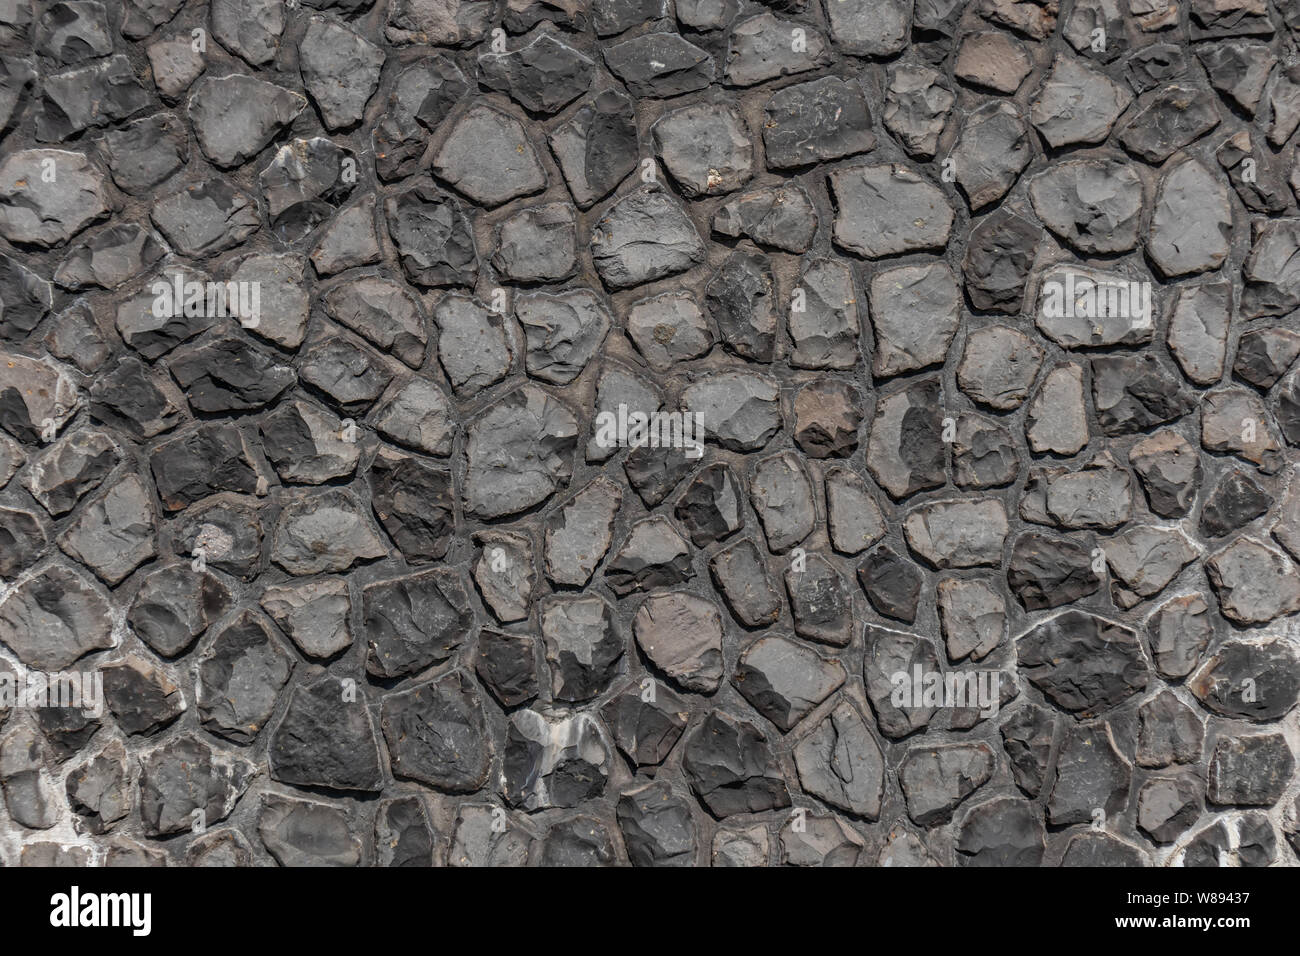 Black color cobblestone street texture, background, high angle, top view Stock Photo